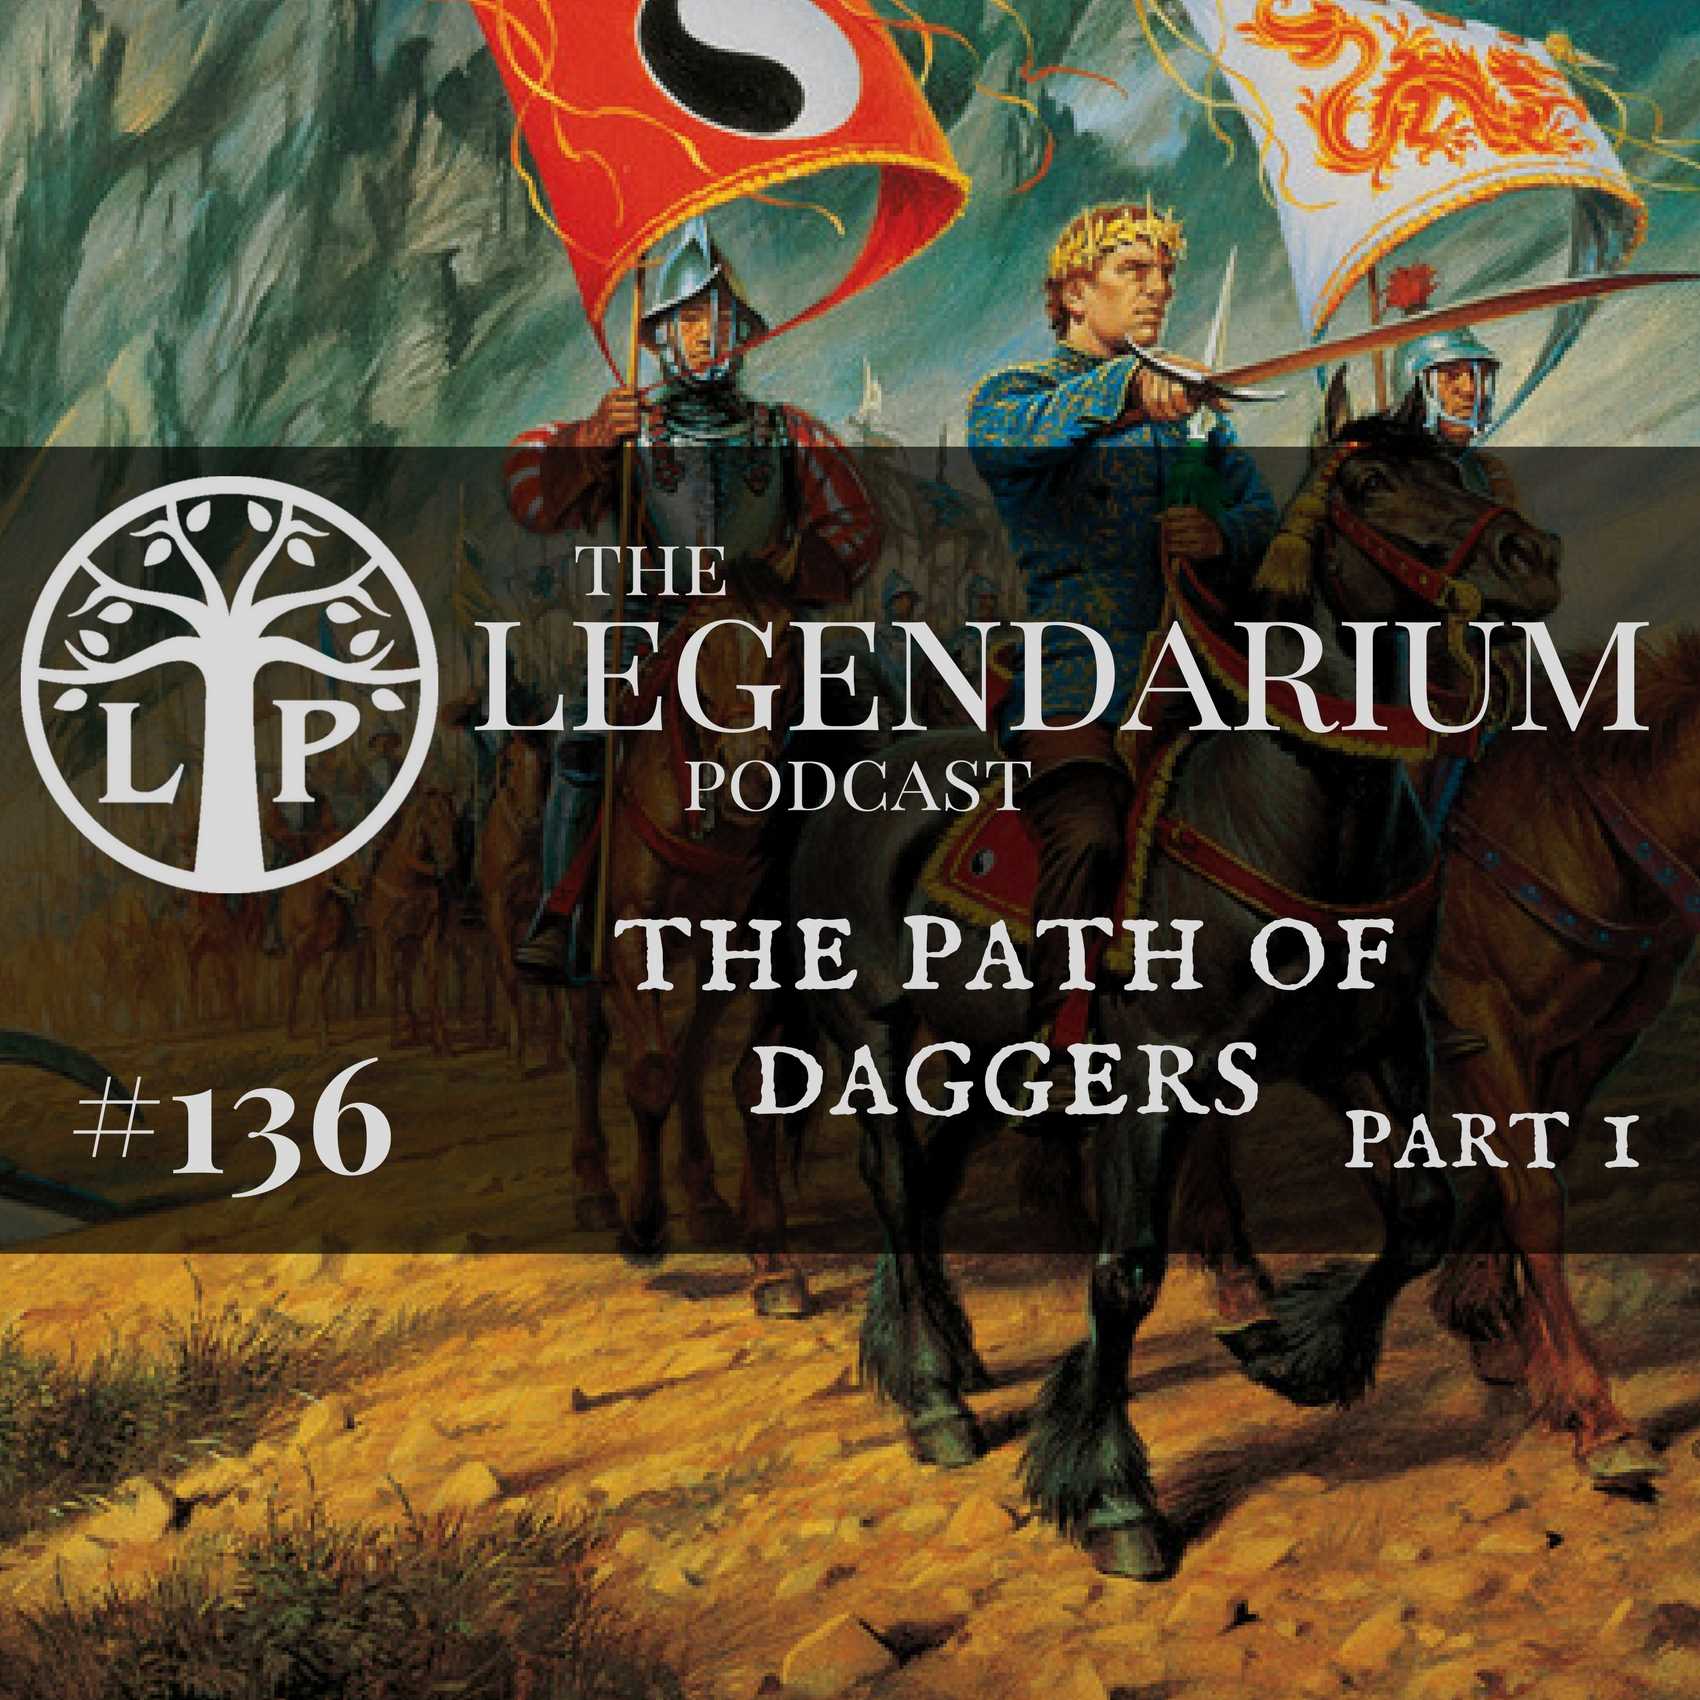 #136. The Path of Daggers, part 1